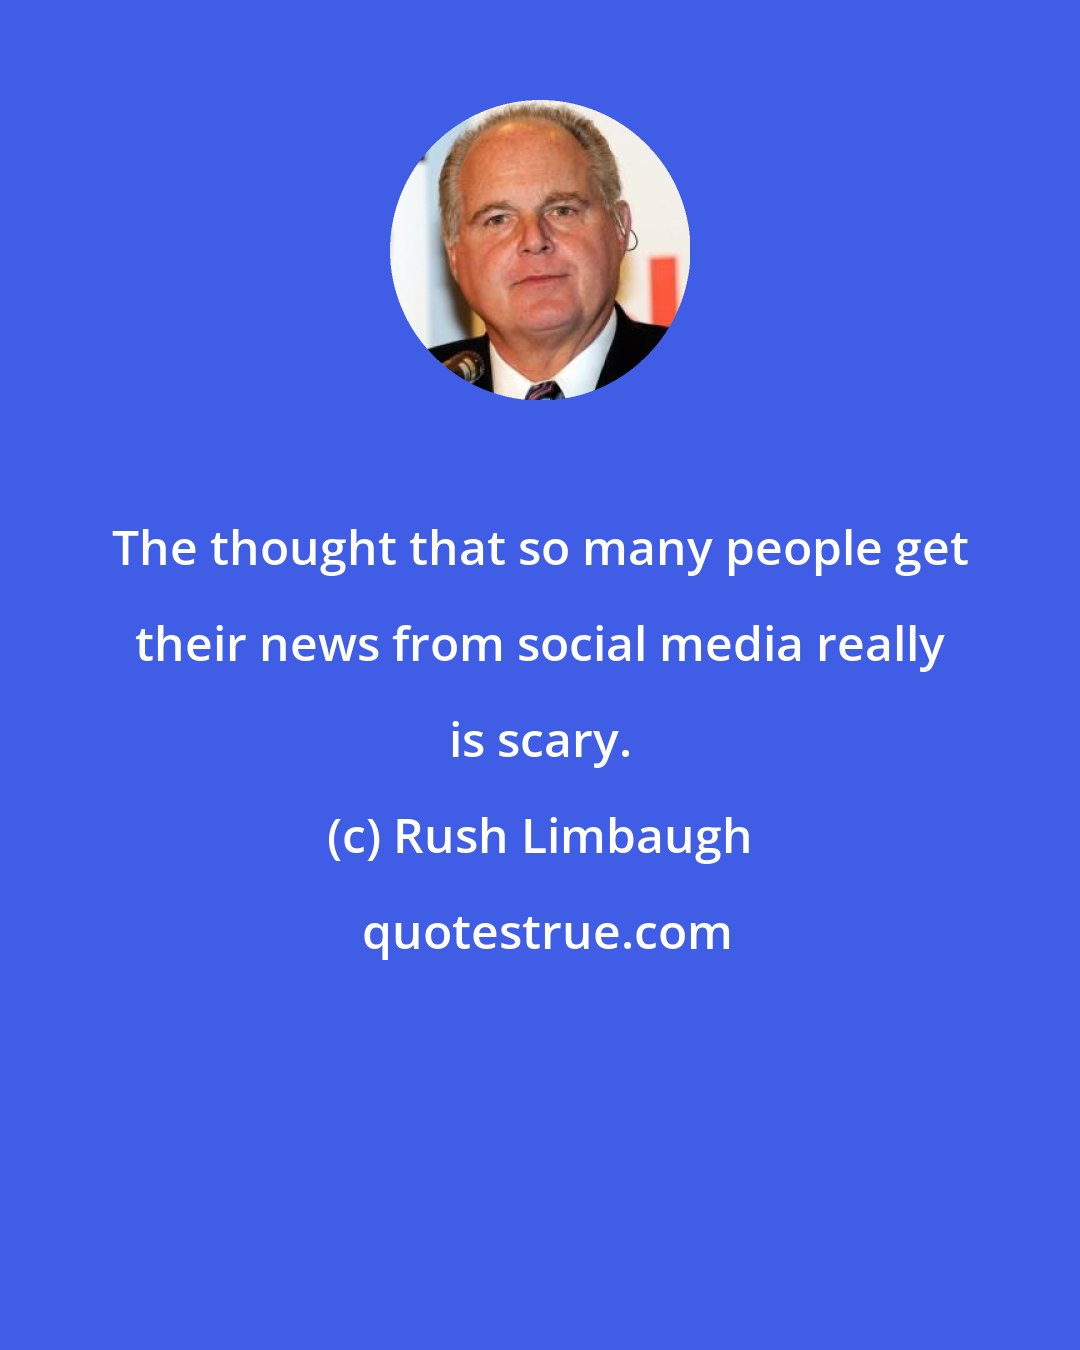 Rush Limbaugh: The thought that so many people get their news from social media really is scary.